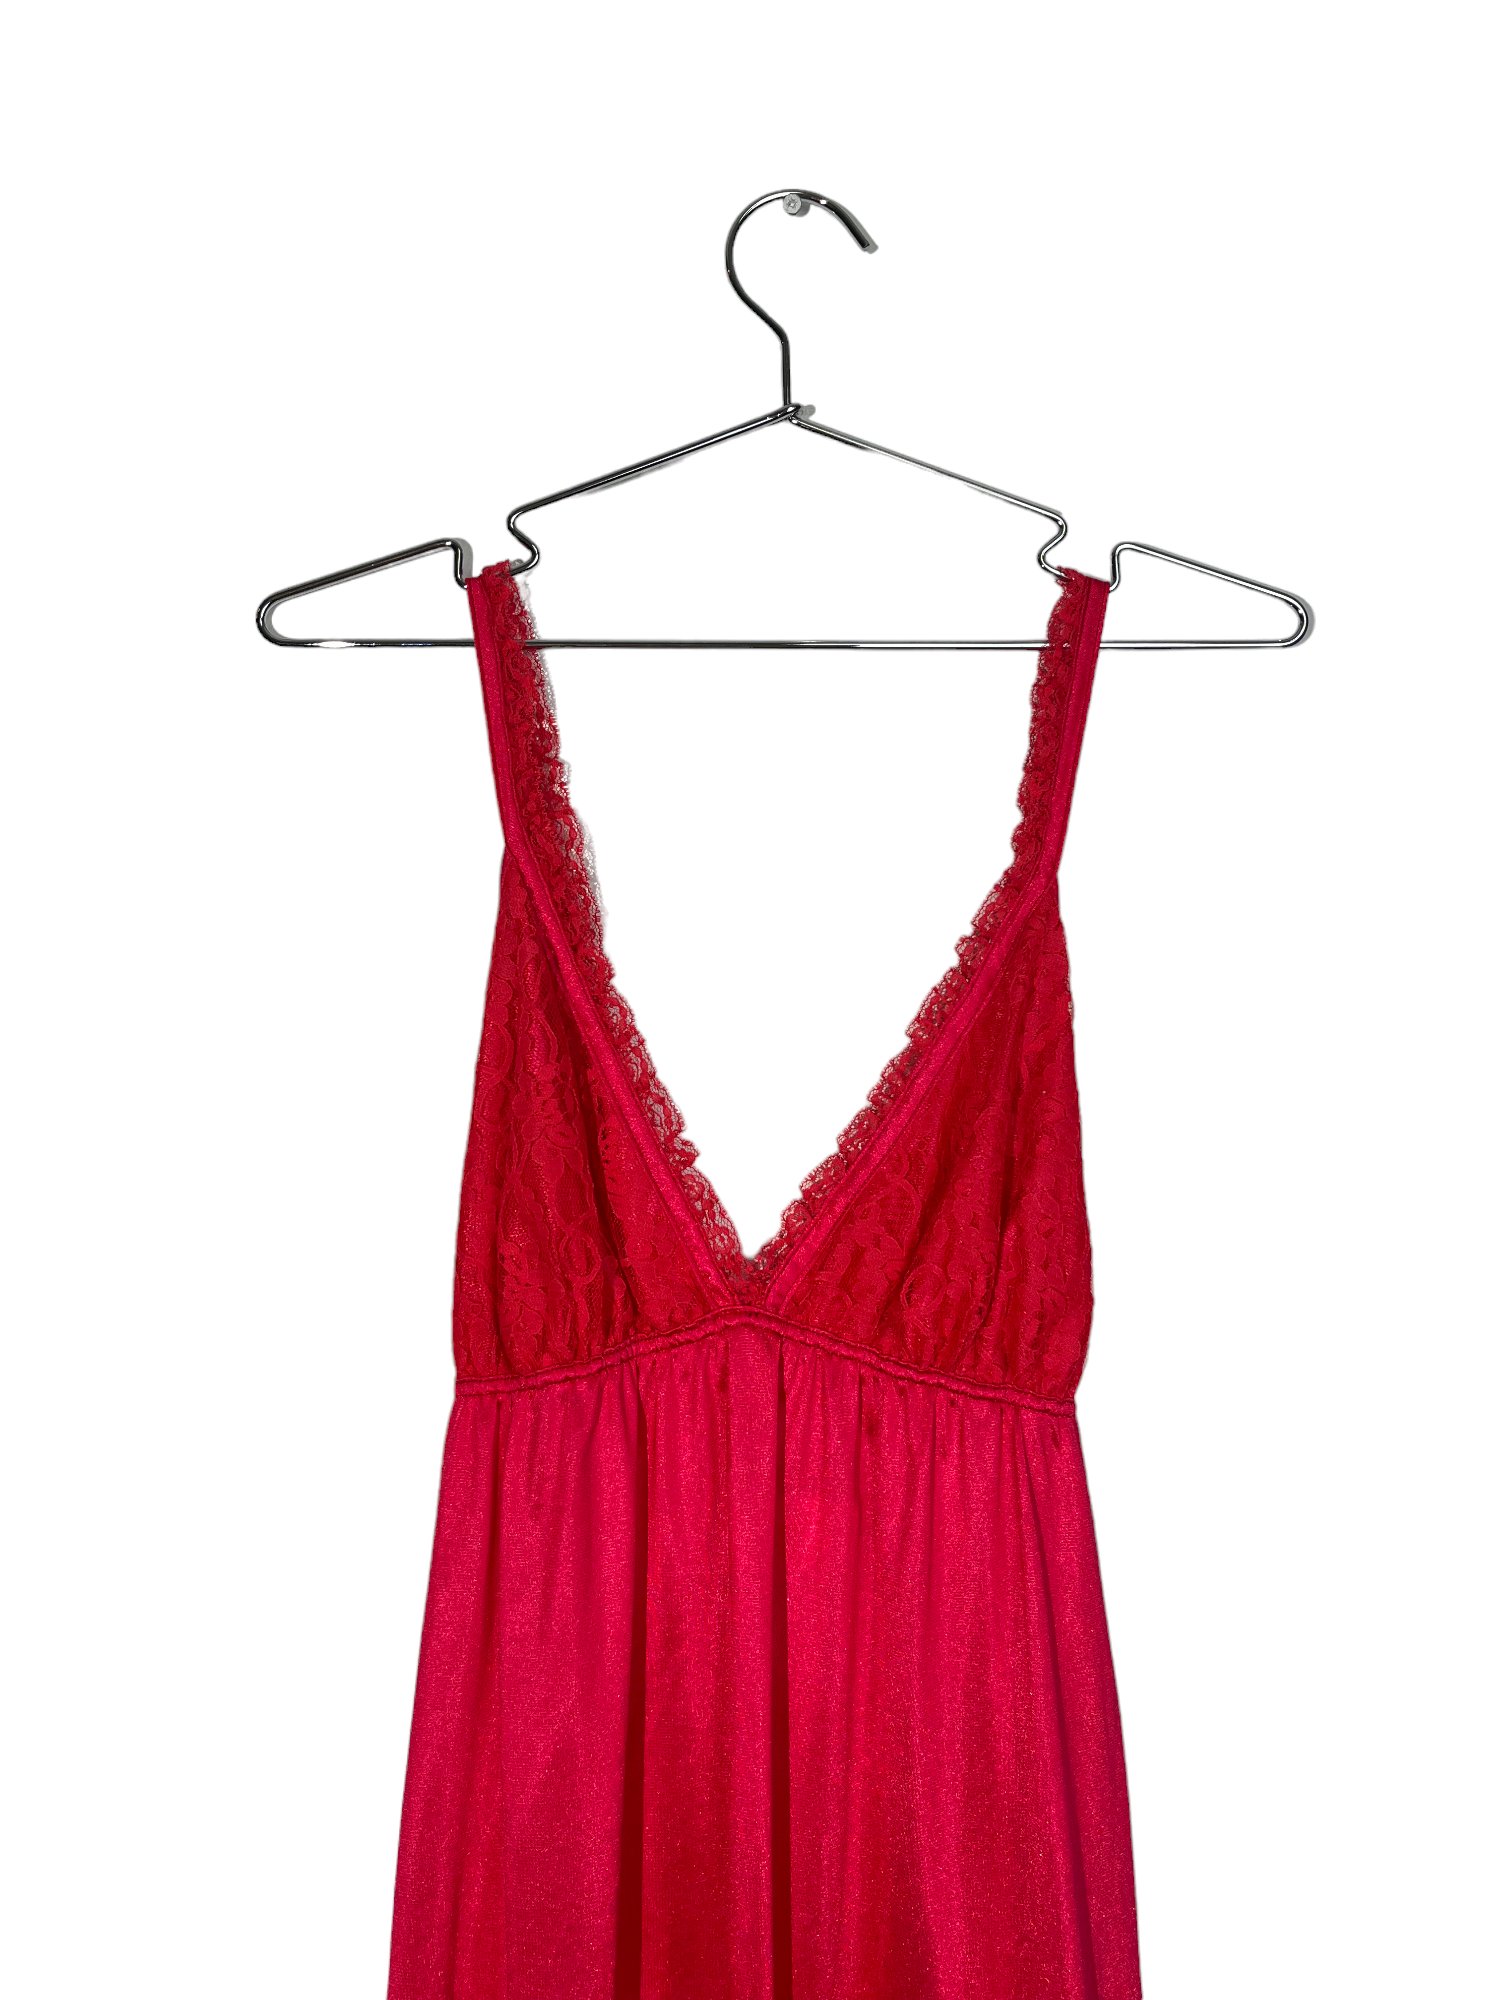 Red Lacy Babydoll Dress